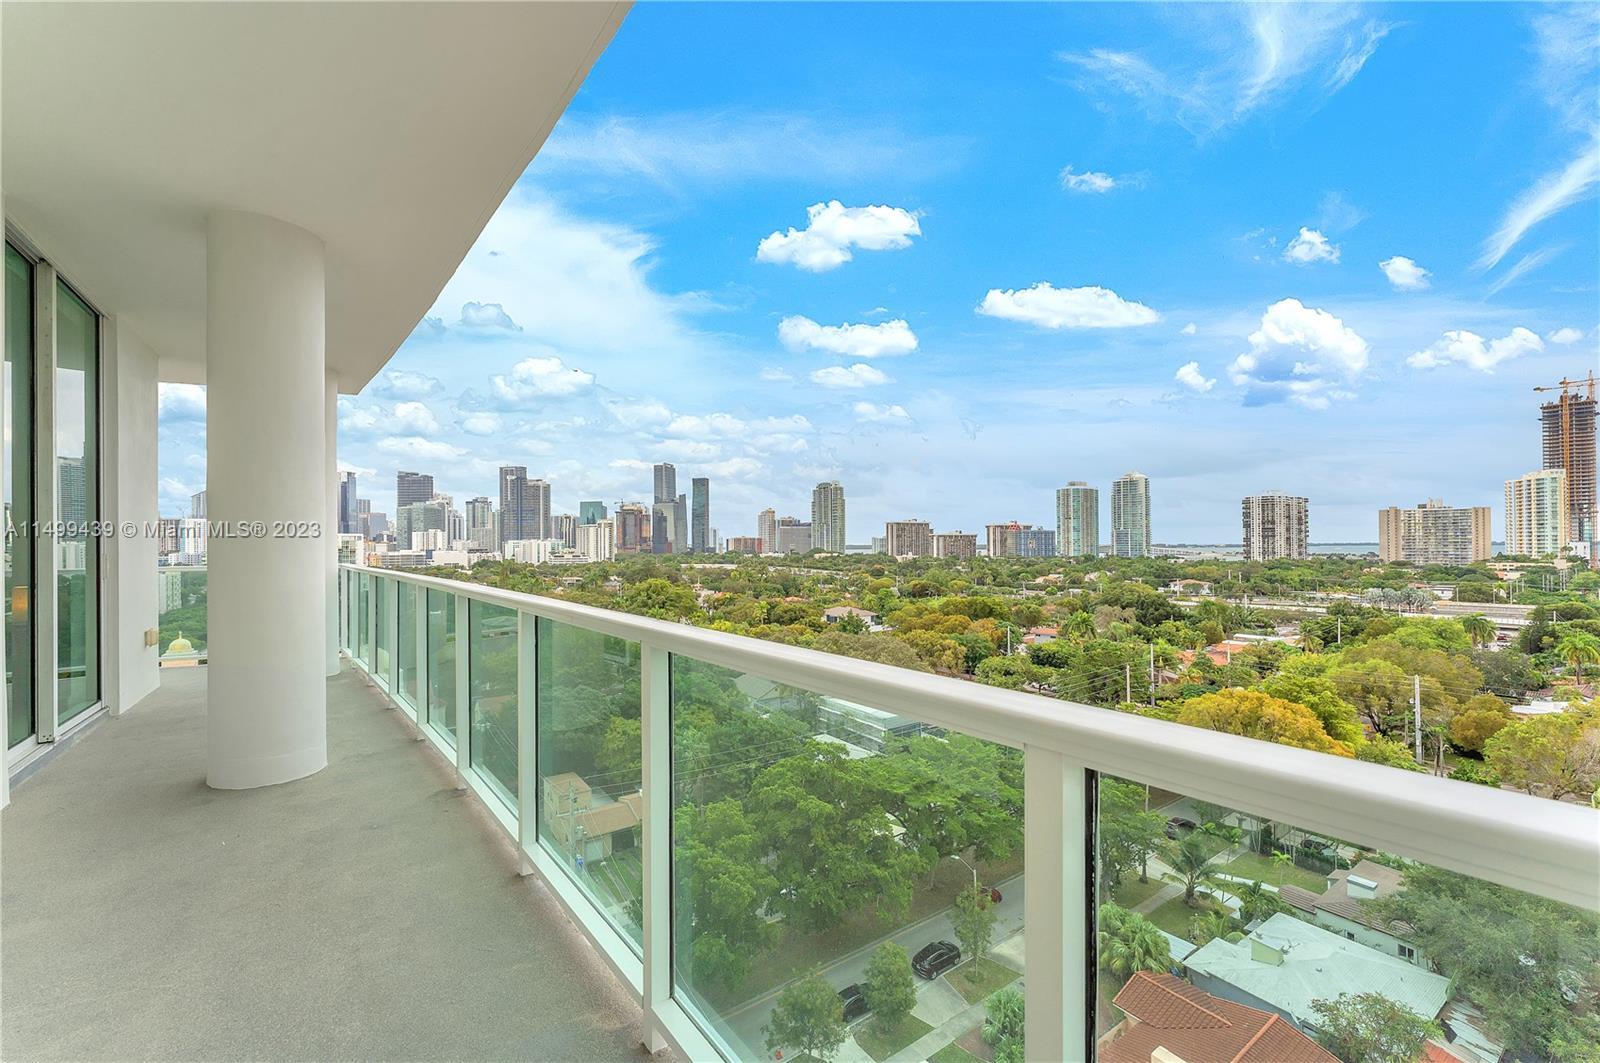 Experience Miami luxury in this 2-bed, 2-bath corner unit. Located in the city's premier building, i